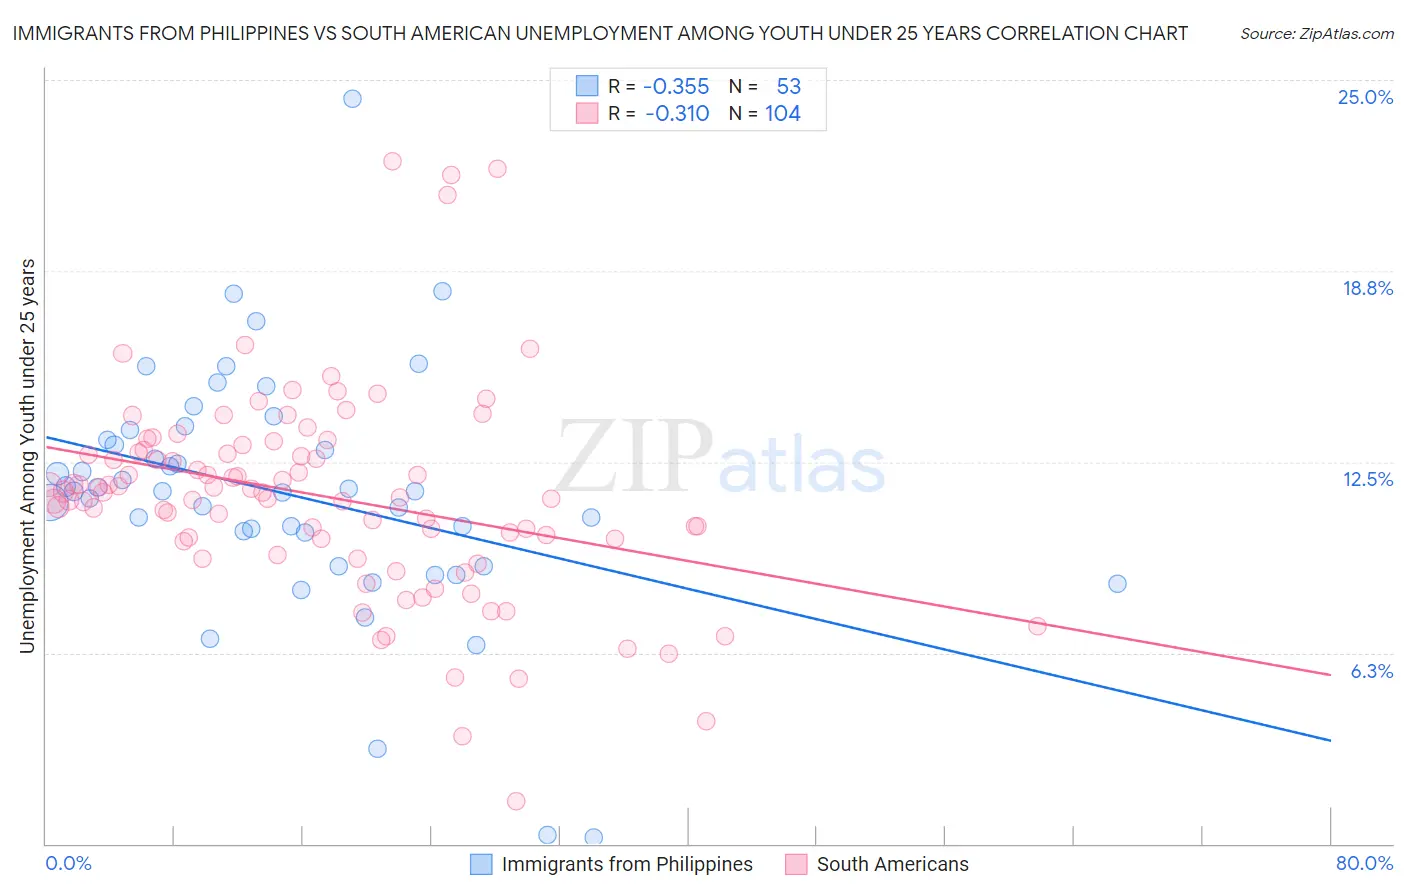 Immigrants from Philippines vs South American Unemployment Among Youth under 25 years